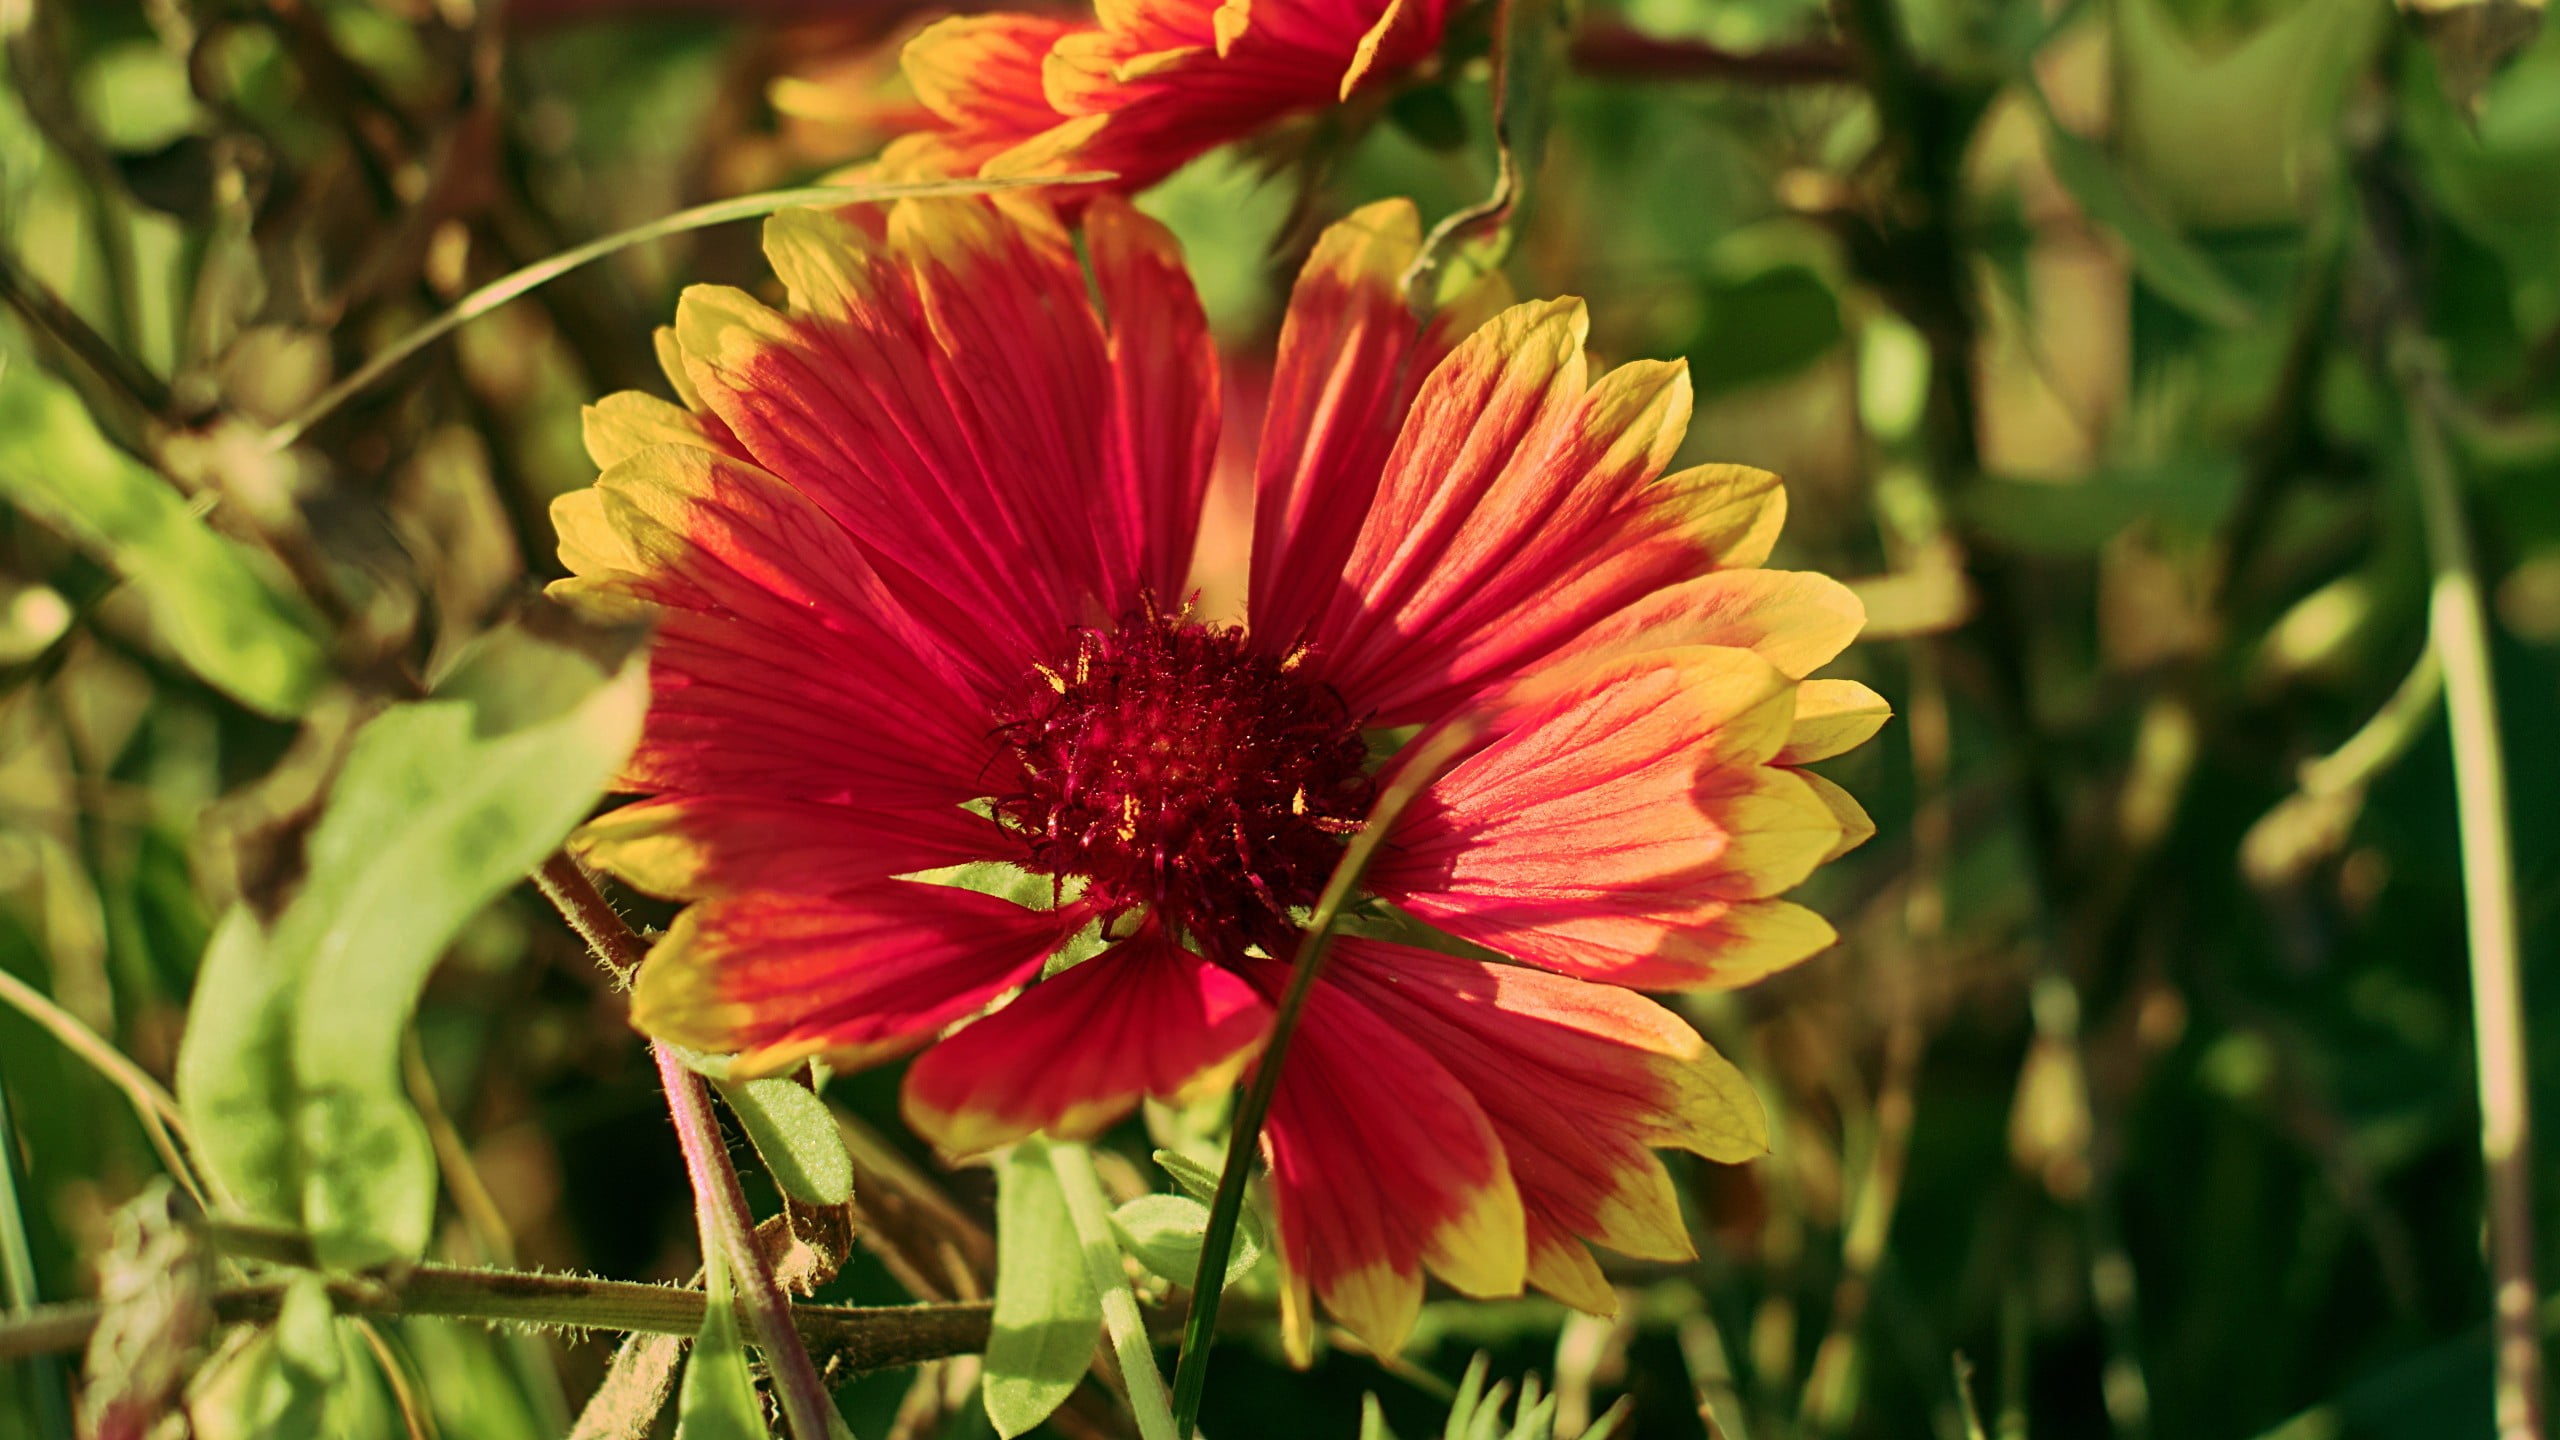 red and yellow petaled flower, flowers, nature, red flowers, plants